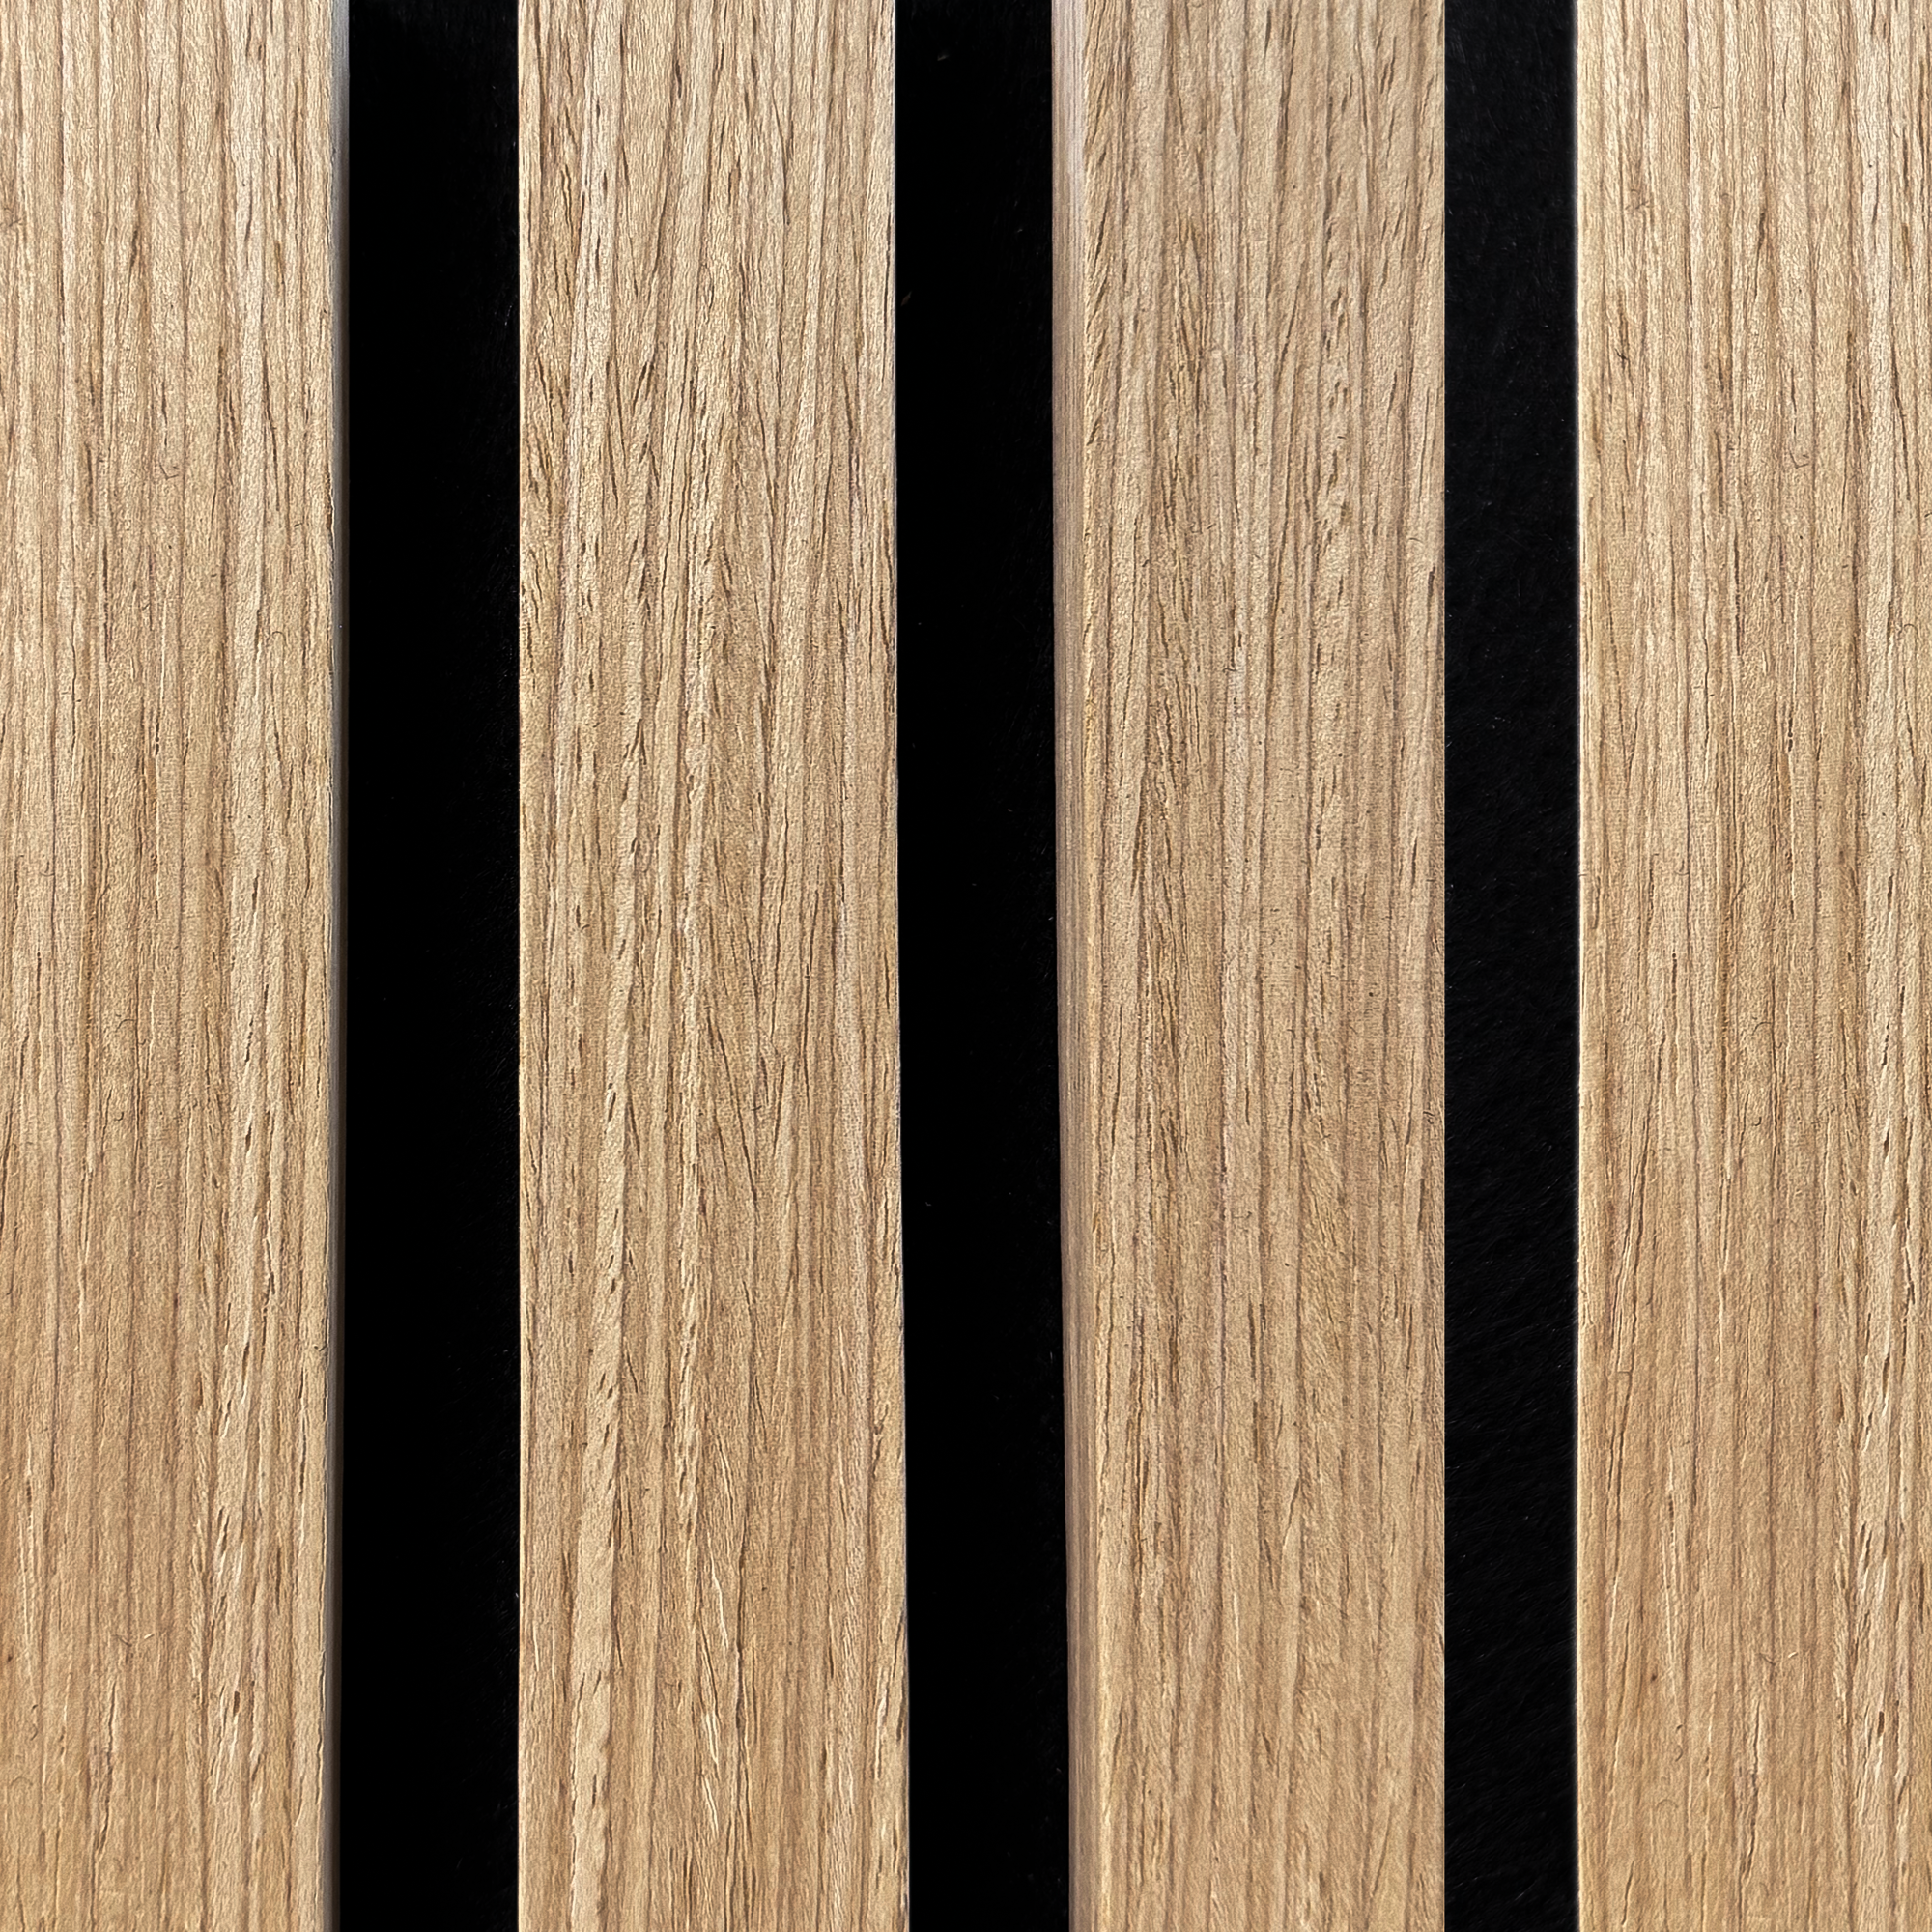 Smooth wood veneer finish with fire-rated acoustic backing. Fast and simple installation for domestic or commercial use.